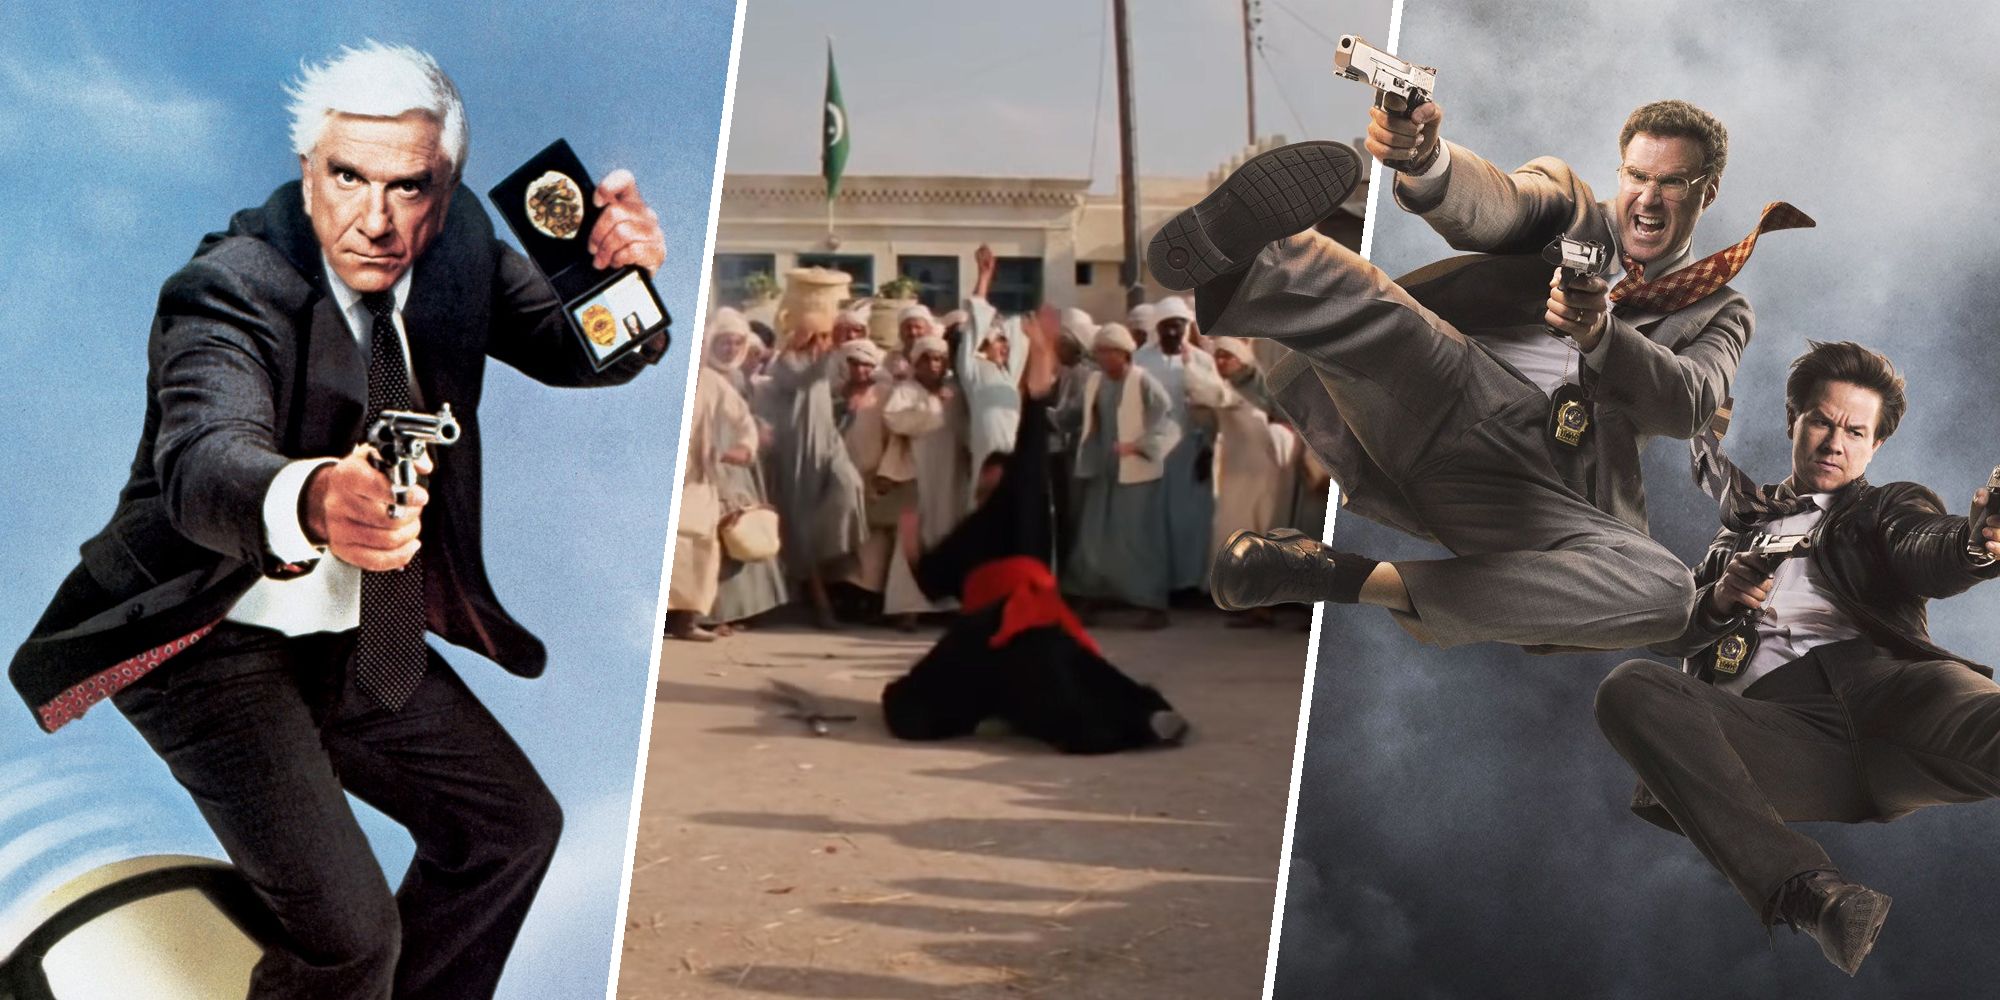 The Funniest Deaths in Movies (The Naked Gun, Raiders of the Lost Ark, and The Other Guys)